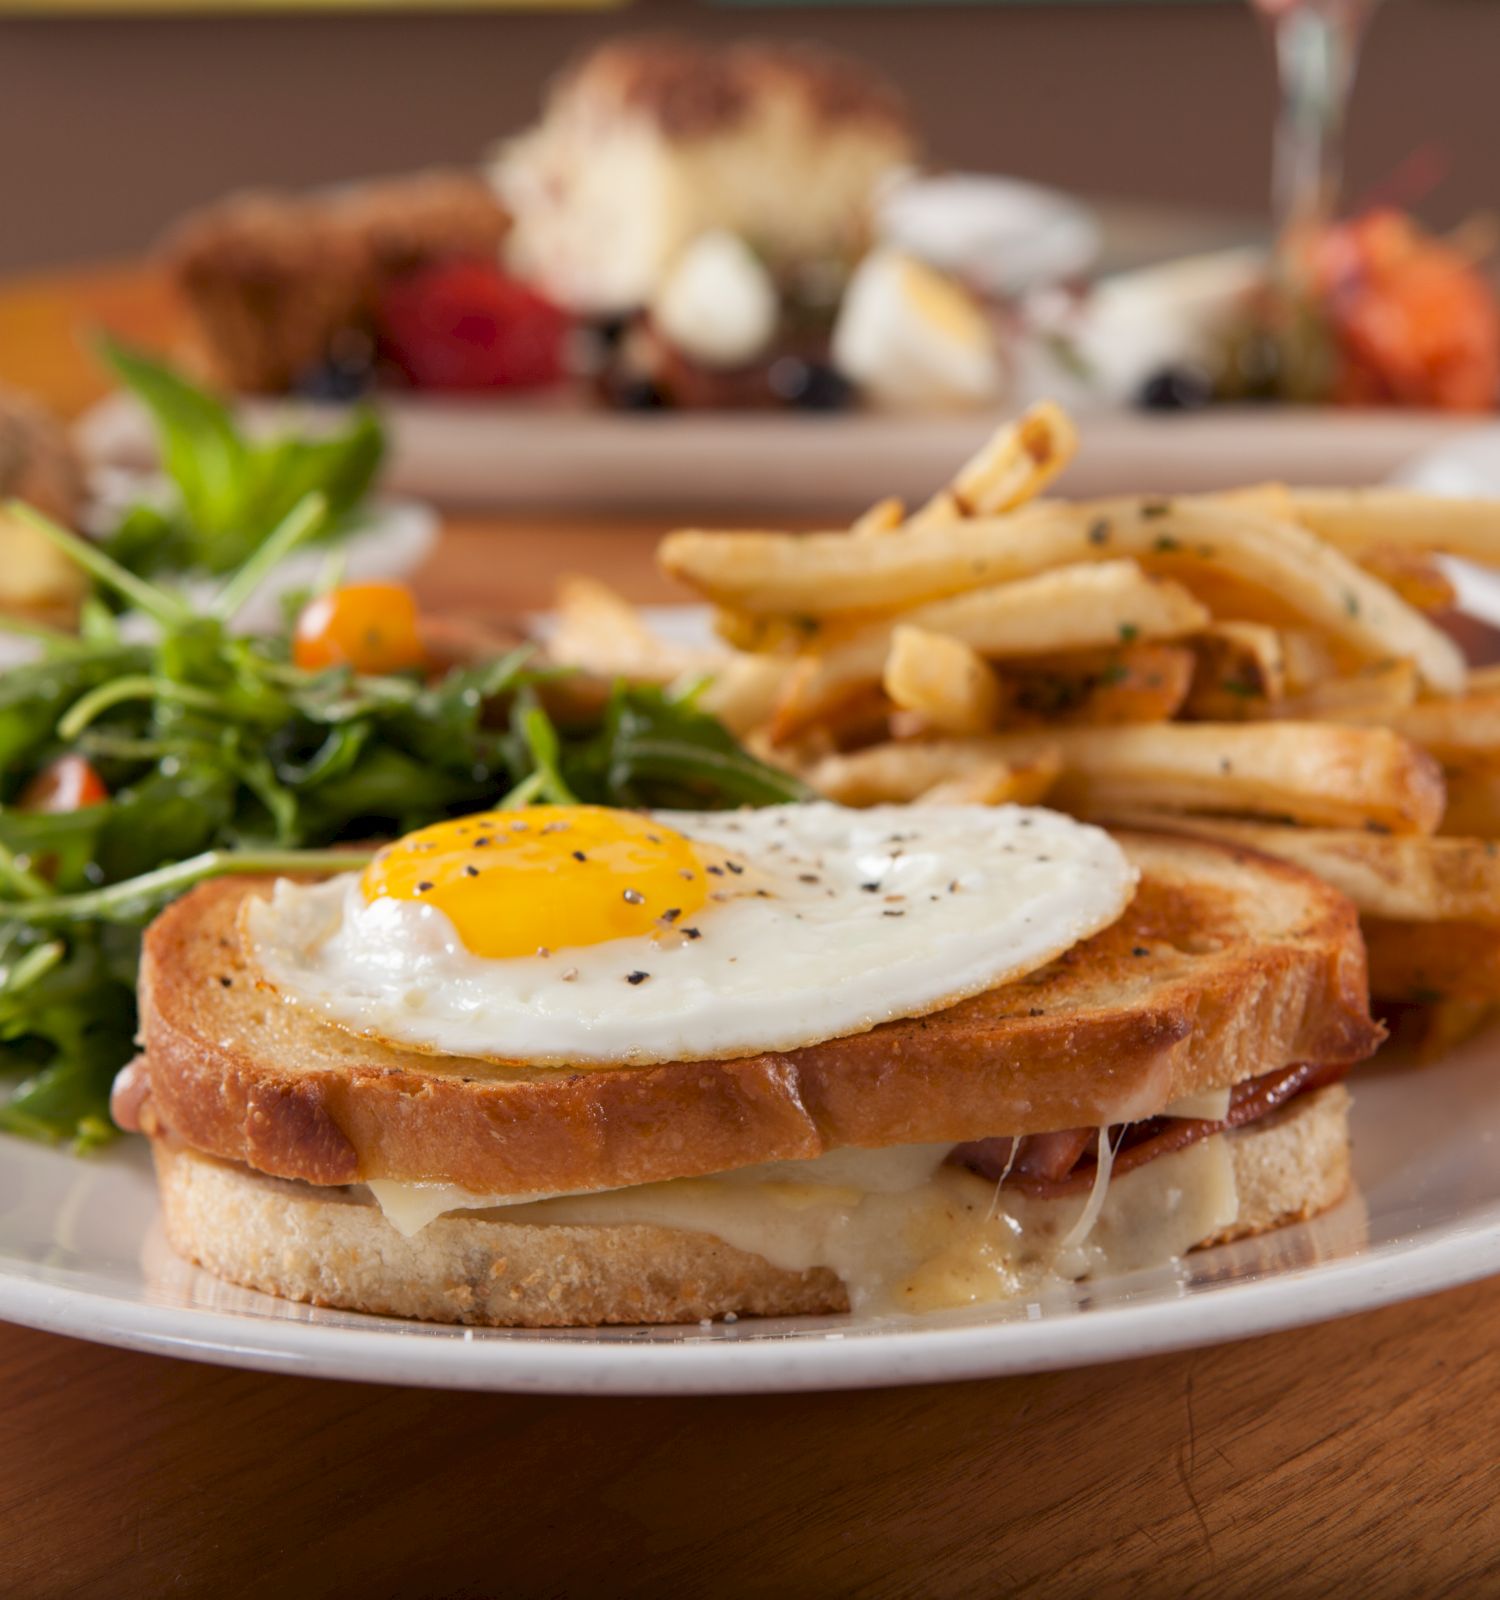 A plate featuring a fried egg on toasted sandwich, fries, and a side salad with other dishes in the background.